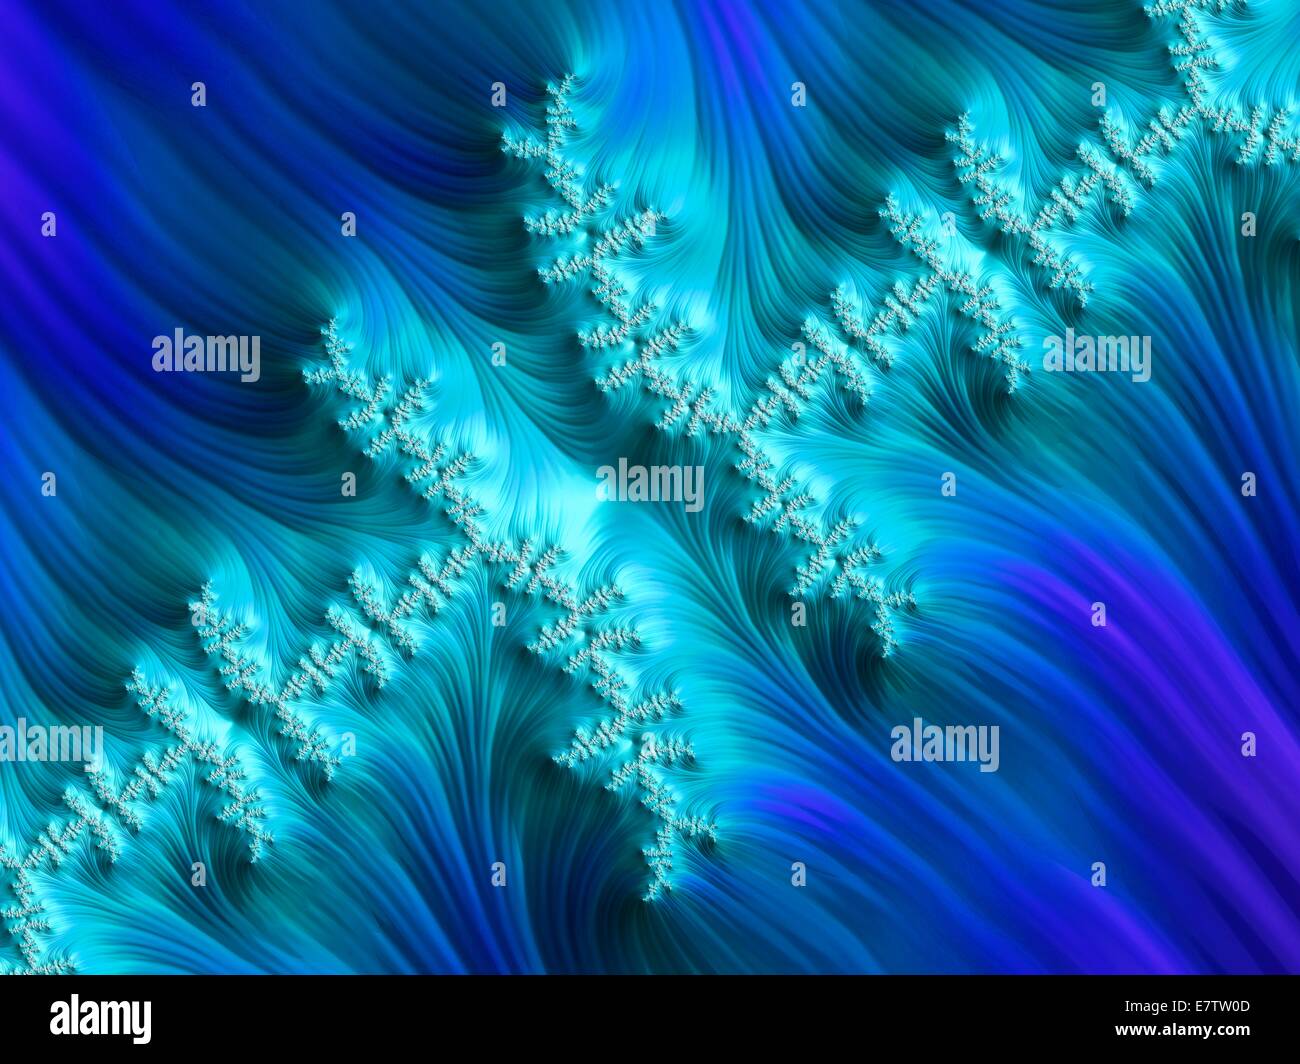 Julia fractal. Computer-generated dragon fractal derived from the Julia Set. Fractals are patterns that are formed by repeated subdivisions using some simple mathematical process. The large scale features of the pattern are repeated forever on an ever dec Stock Photo